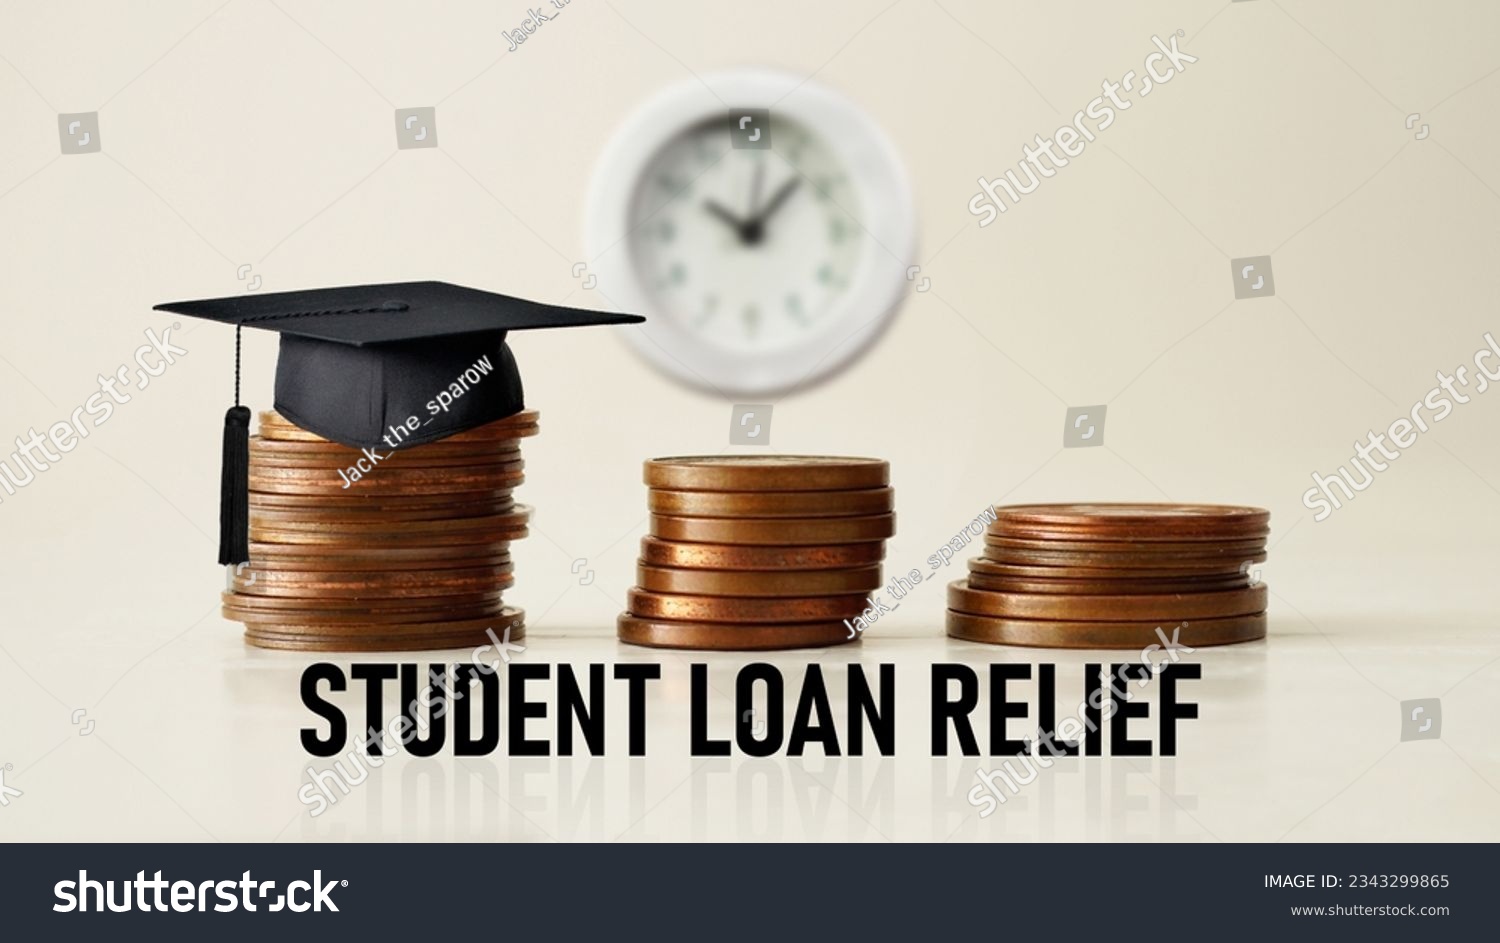 Student loan relief is shown using a text and photo of coins #2343299865